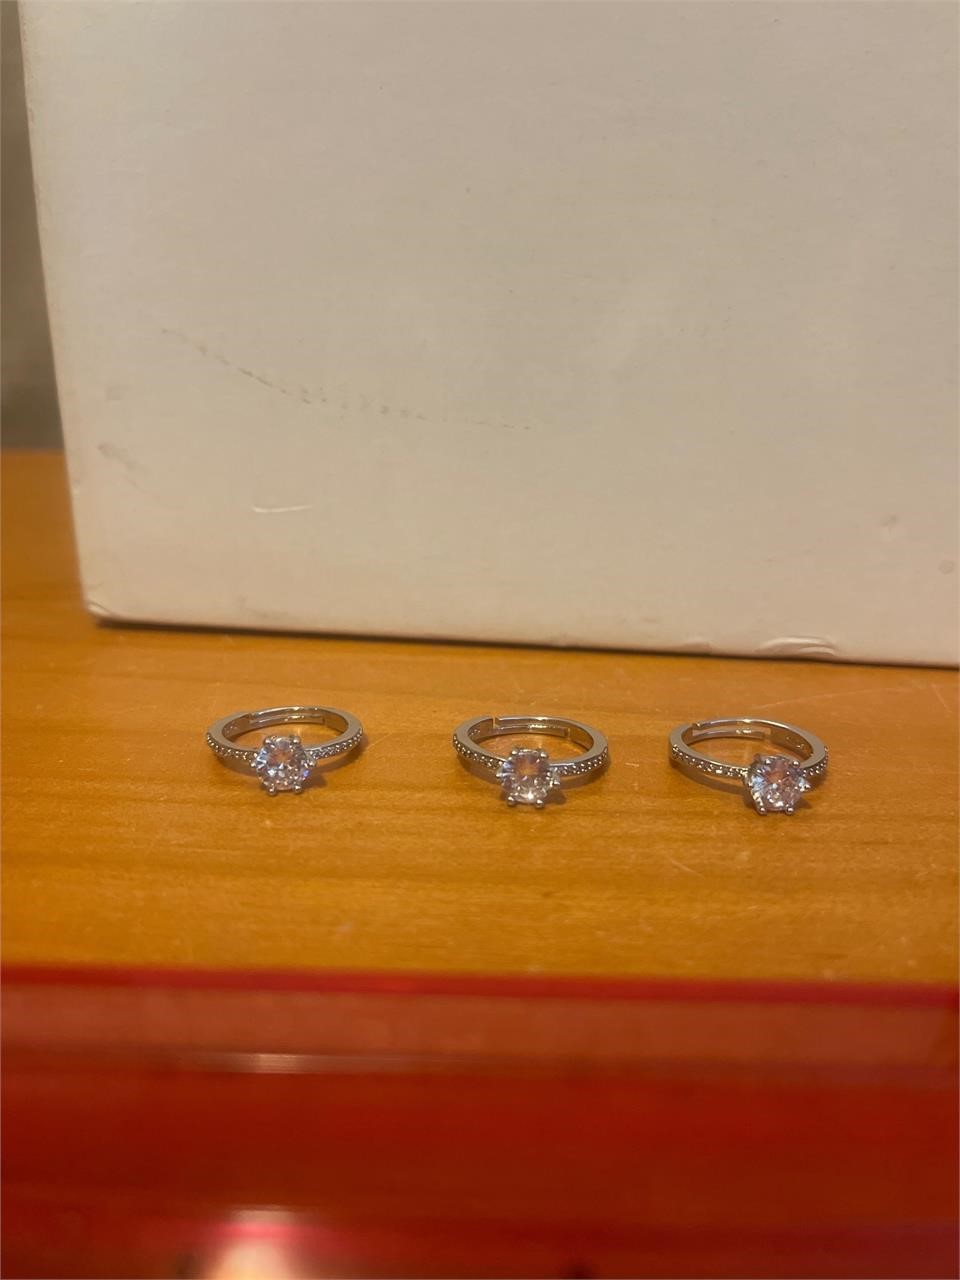 3 new .925 adjustable rings